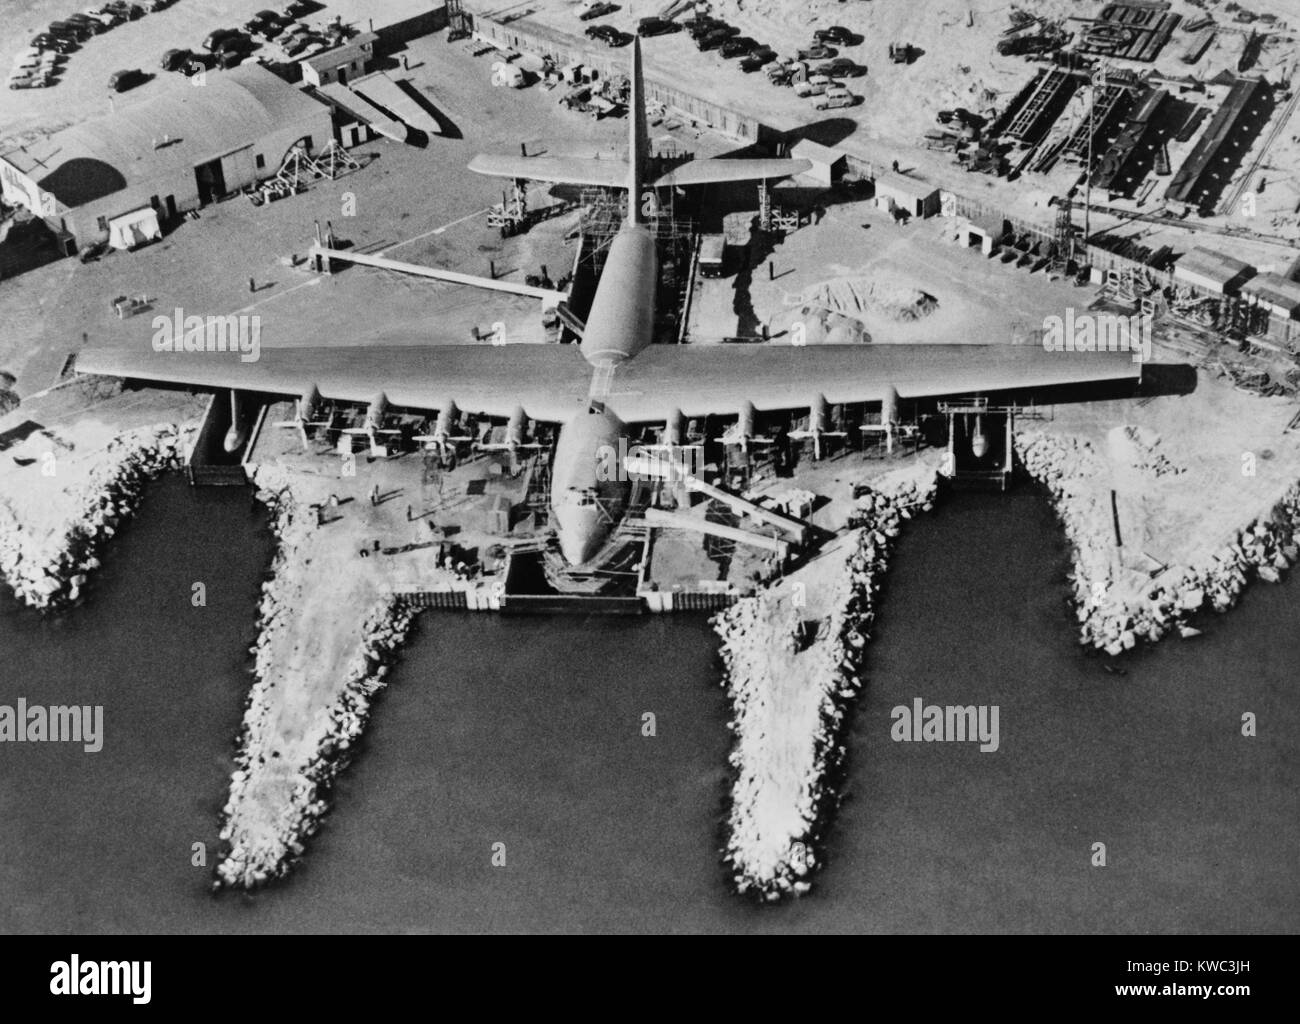 Aerial view of Hughes Flying-boat seaplane under construction at its dock in Long Beach, 1947. The prototype was named 'Hughes H-4 Hercules', but better known as the 'Spruce Goose' because of its wood (birch) construction. Developed as a troop transport, it was six times larger than any aircraft of its time. On Nov. 2, 1947 it made its only test flight, because the war that caused its creation was over. (BSLOC 2015 14 123) Stock Photo